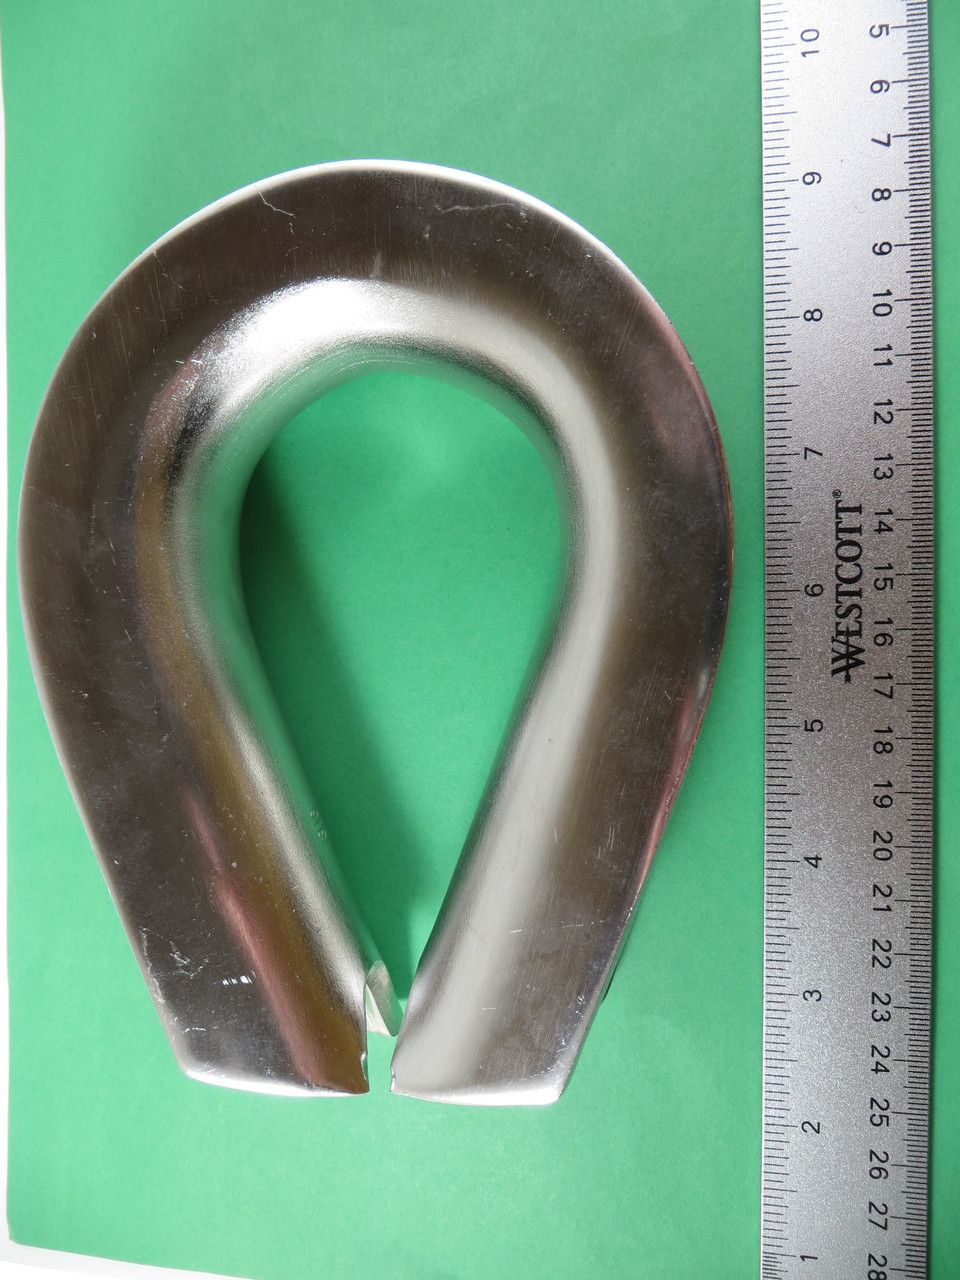 Stainless Steel 316 1 (25mm) Wire Rope Thimbles Heavy Duty Marine Grade  for Rope Size 1 - US Stainless